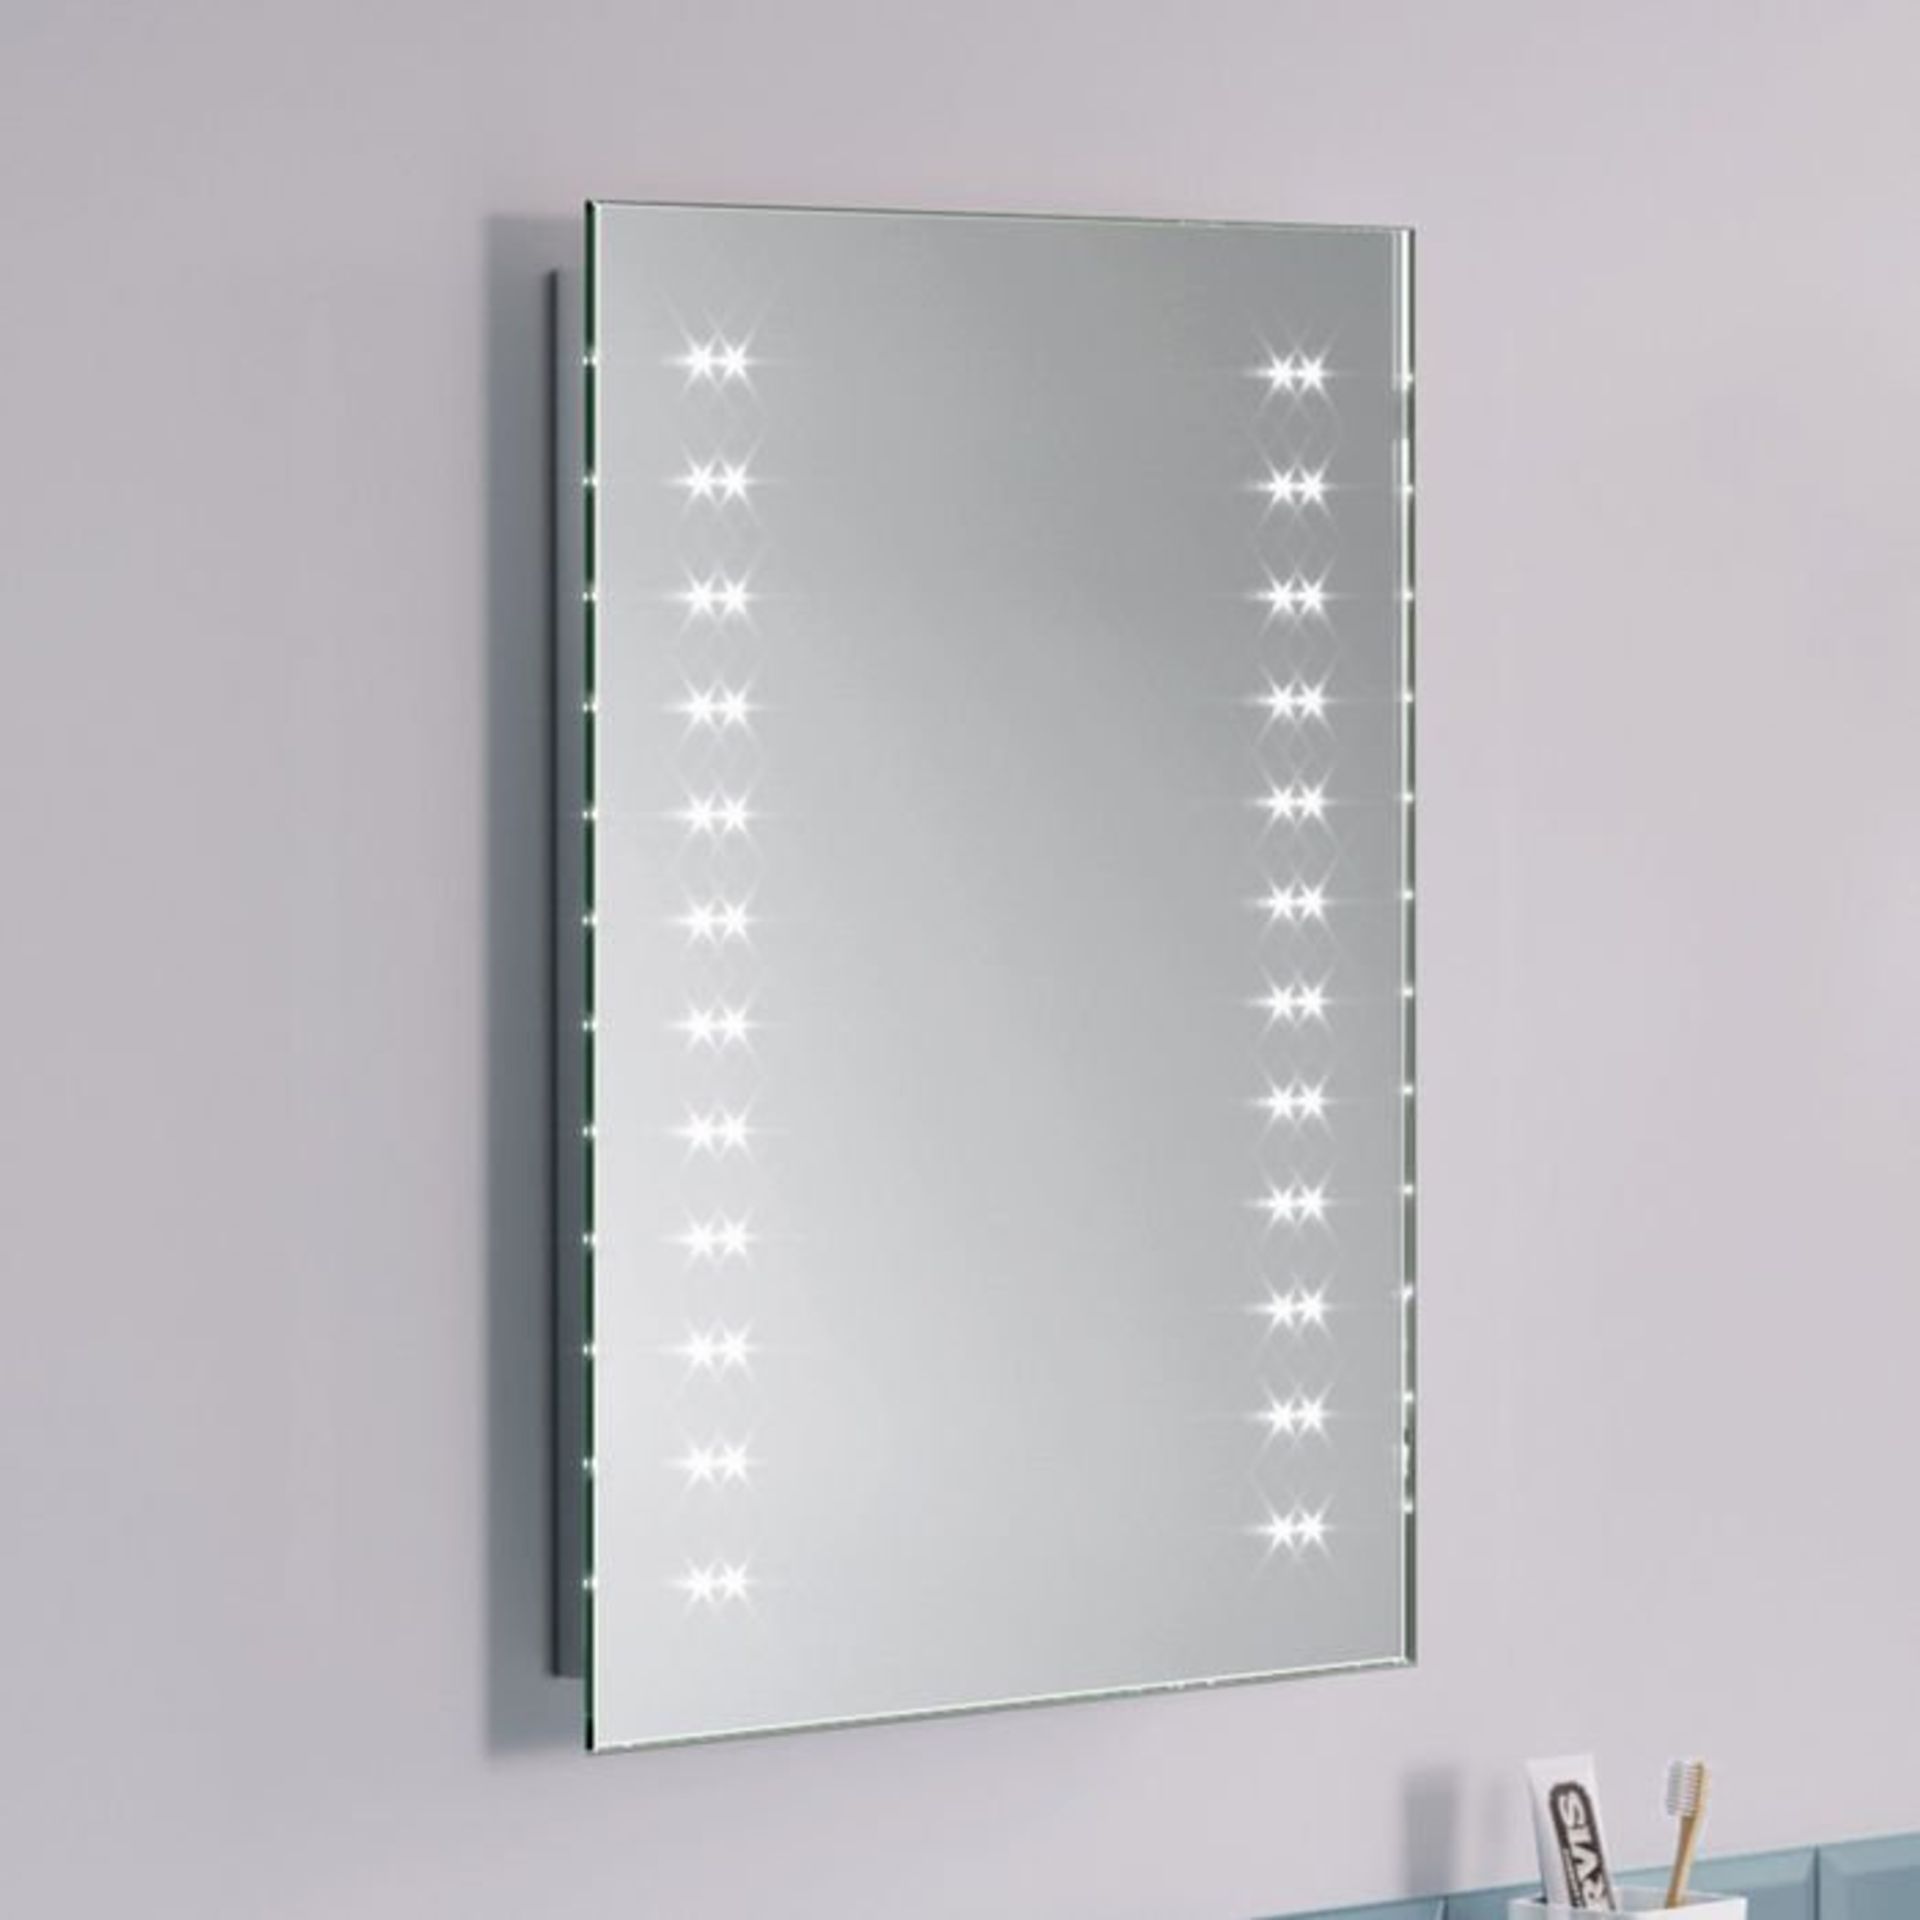 (Y30) 390x500mm Galactic LED Mirror - Battery Operated. Energy saving controlled On / Off switch - Image 3 of 5